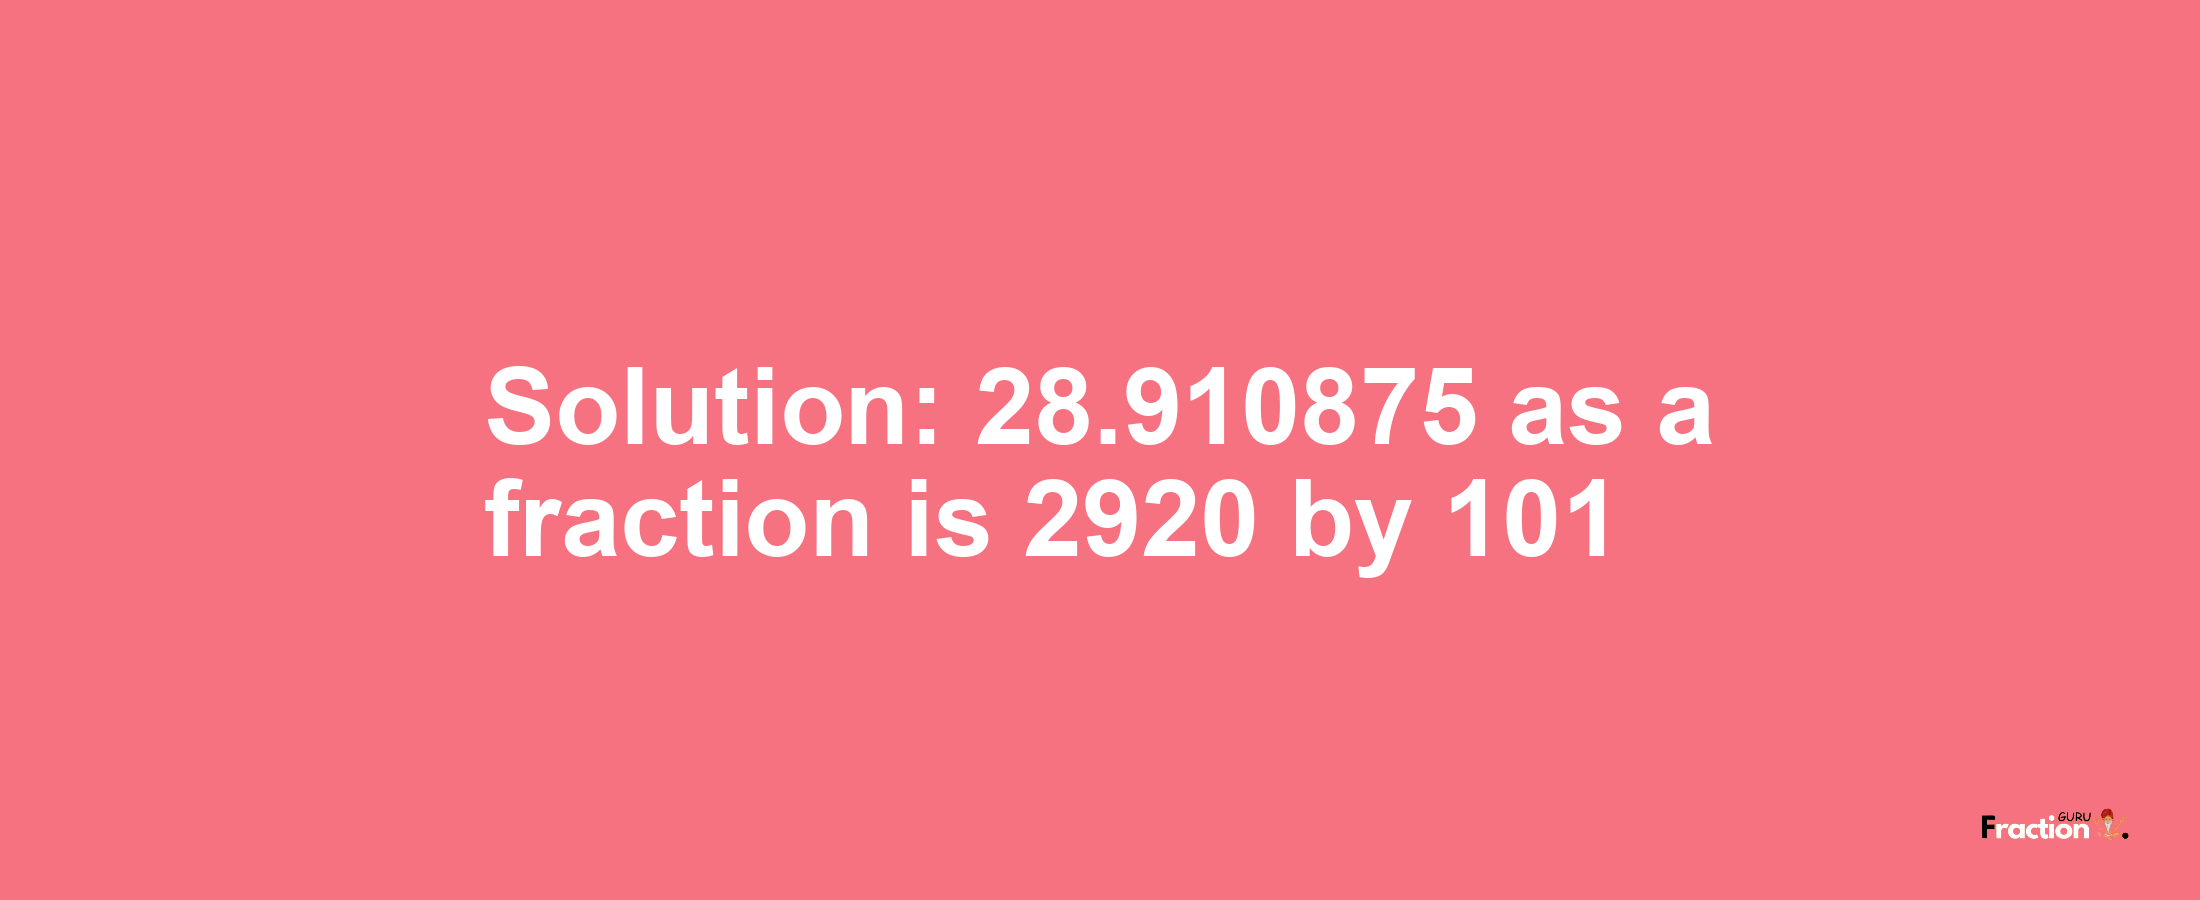 Solution:28.910875 as a fraction is 2920/101